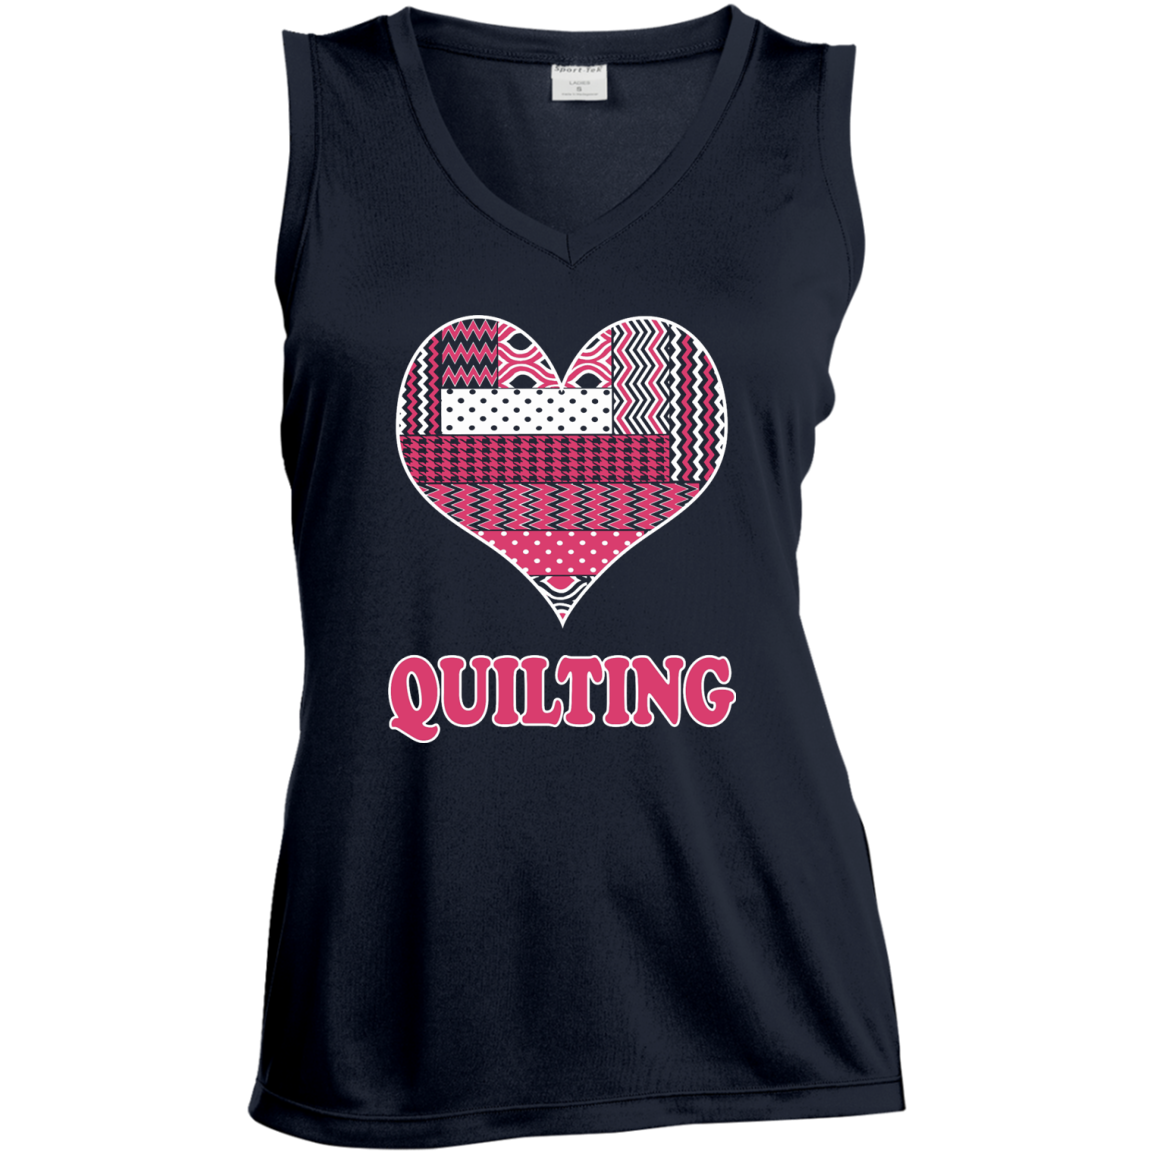 Heart Quilting Ladies Sleeveless V-Neck - Crafter4Life - 3